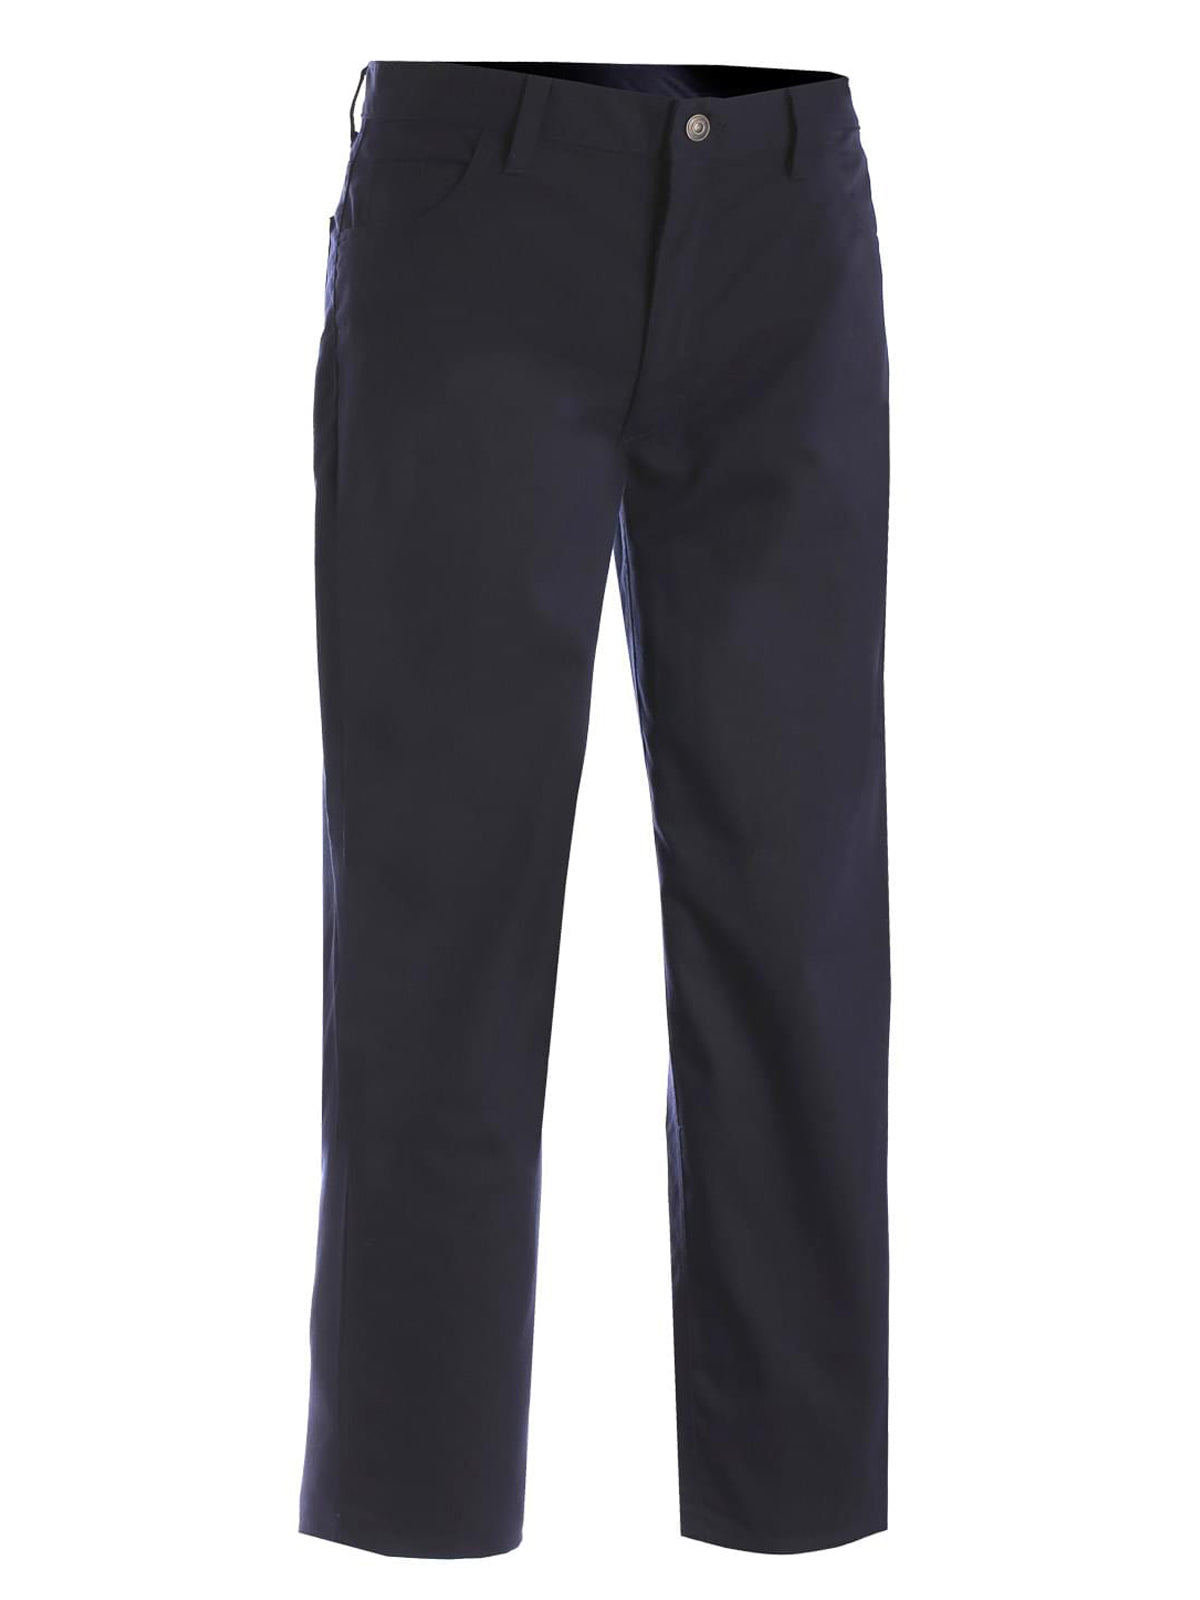 Men's Rugged Flat Front Pant (Sizes: 54  x UL to 54  x UR)